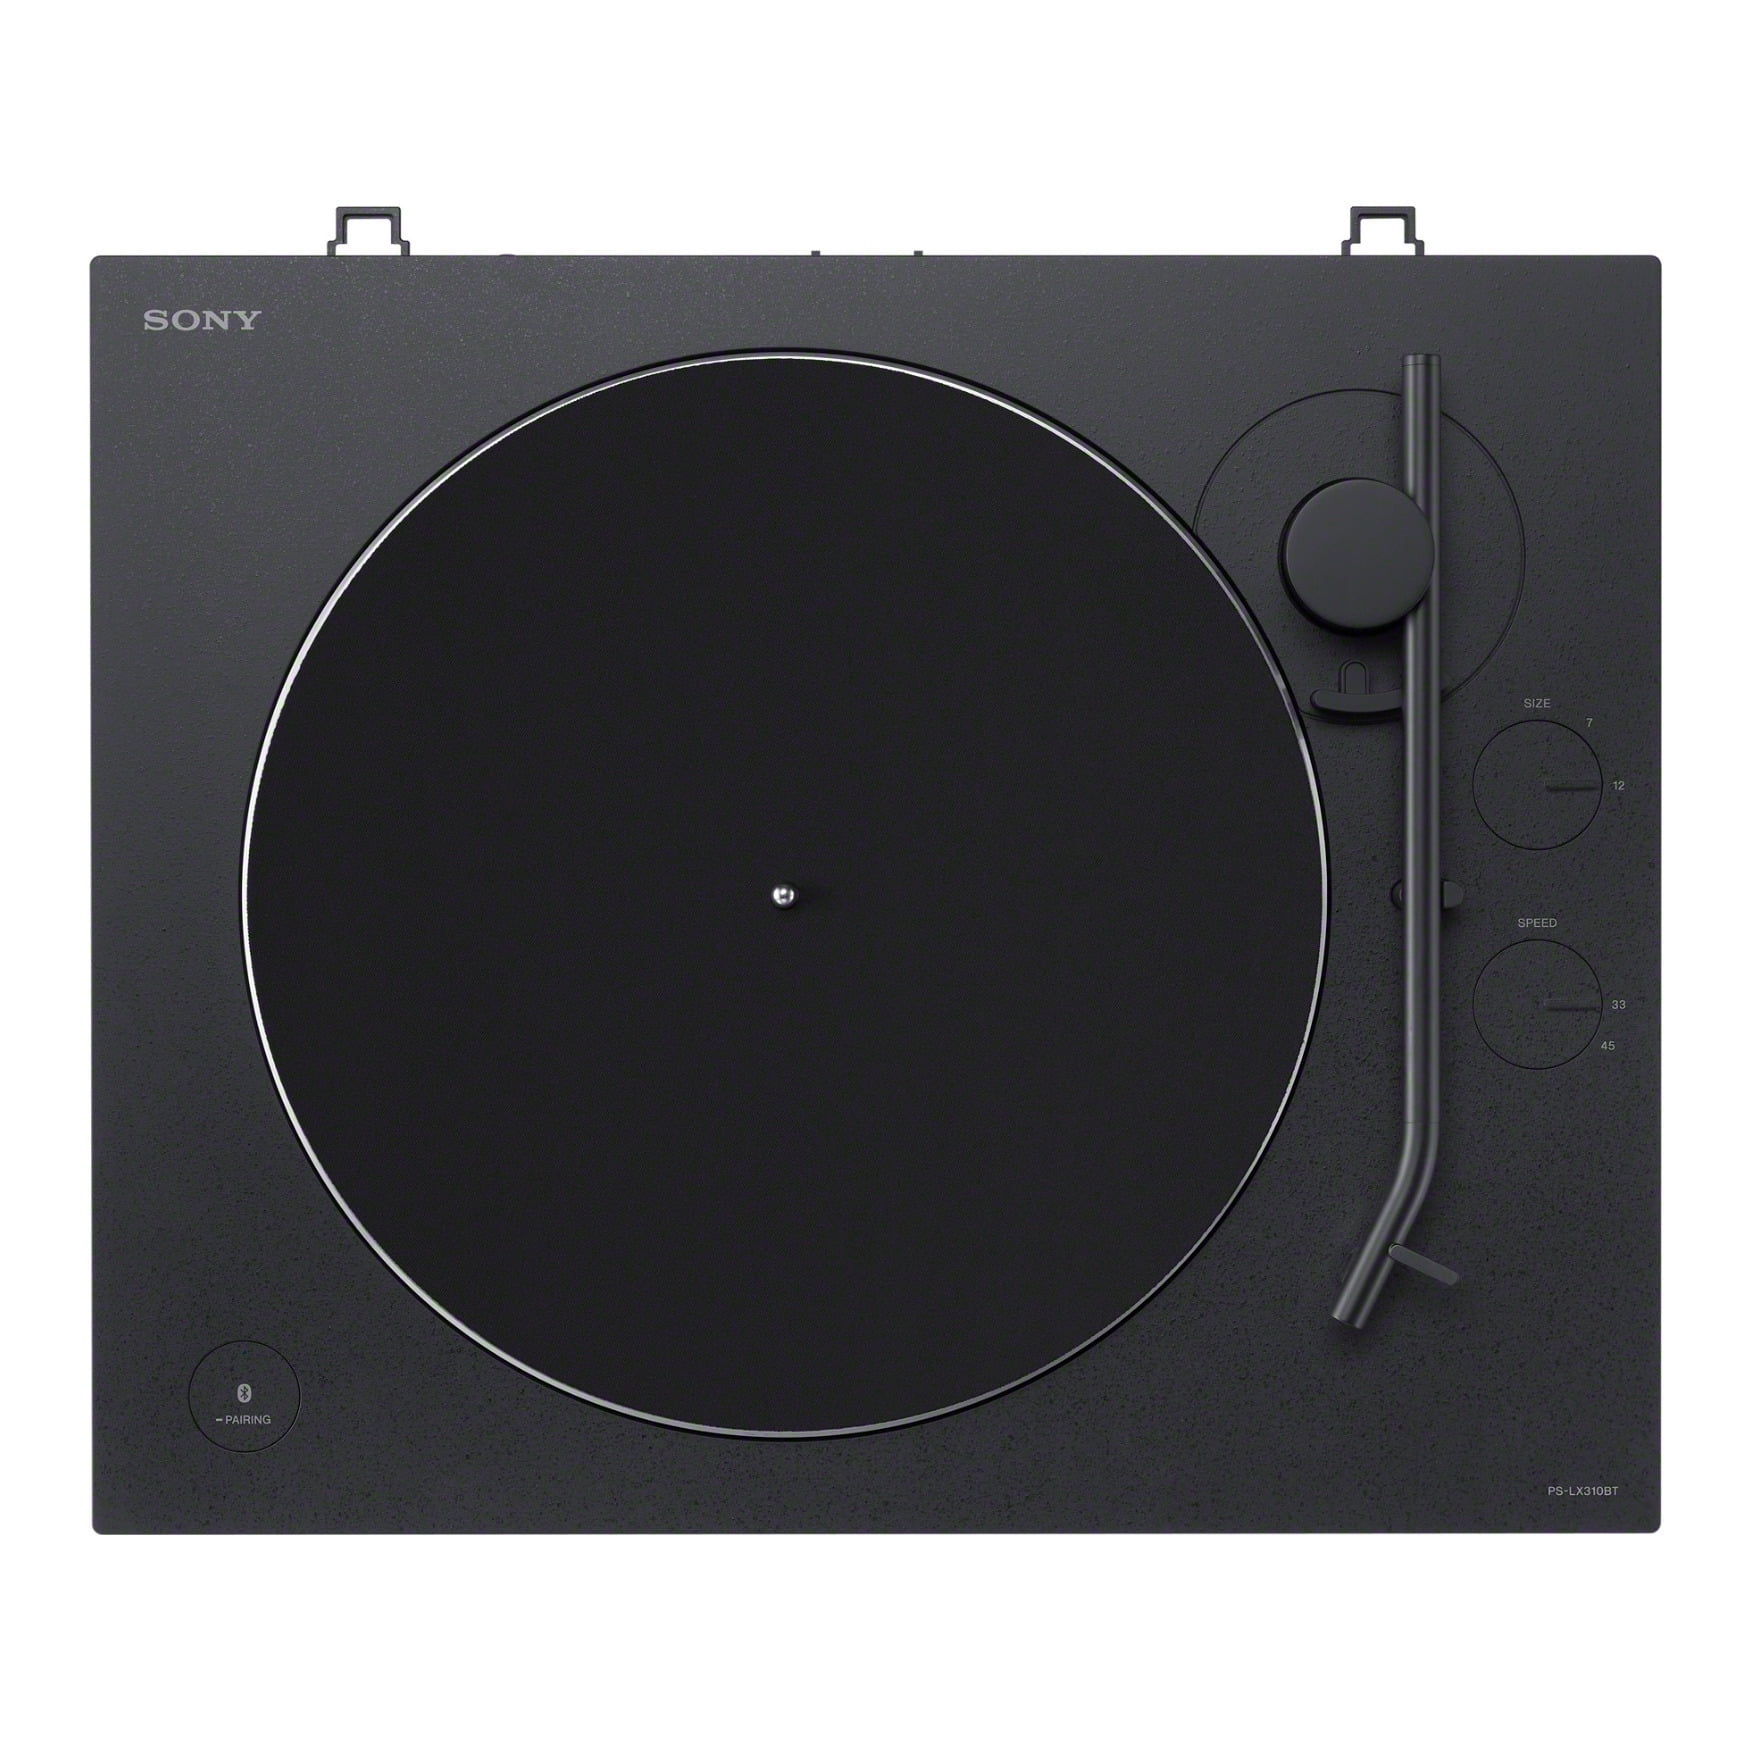 Sony PS-LX310BT Wireless Turntable with Vinyl Cleaning Bundle Walmart.com